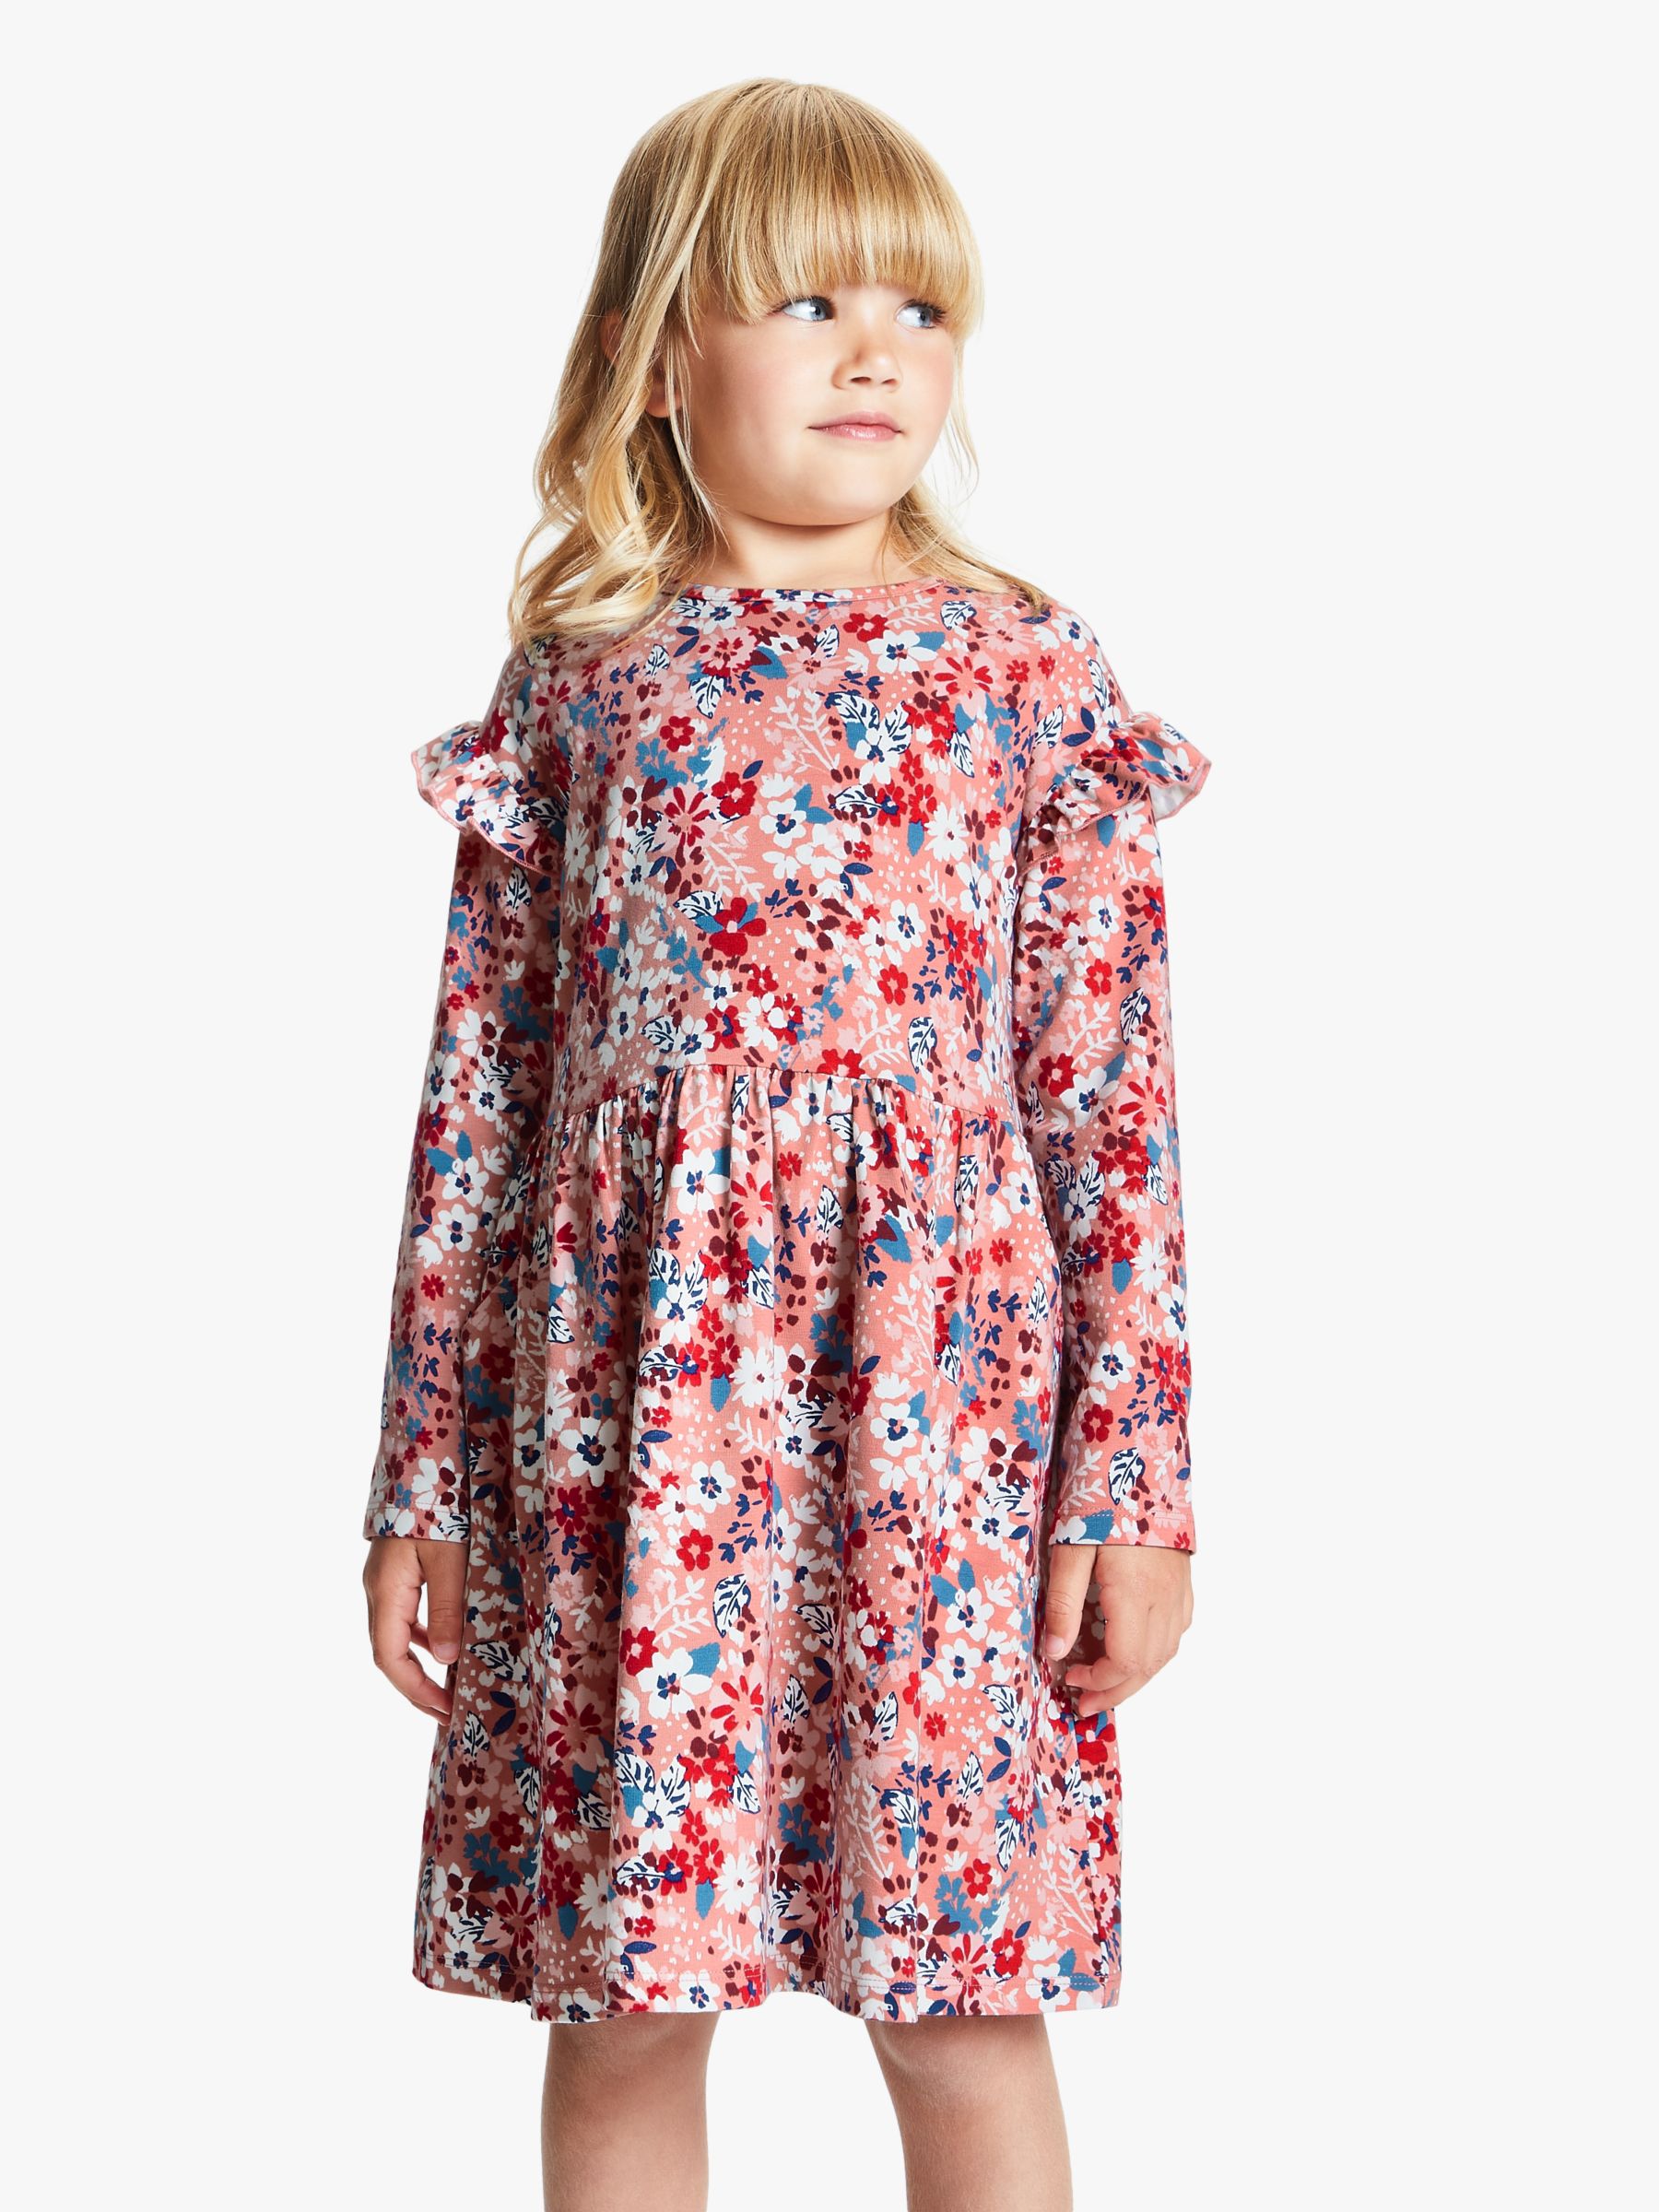 Image of John Lewis and Partners Girls Floral Print Dress Pink